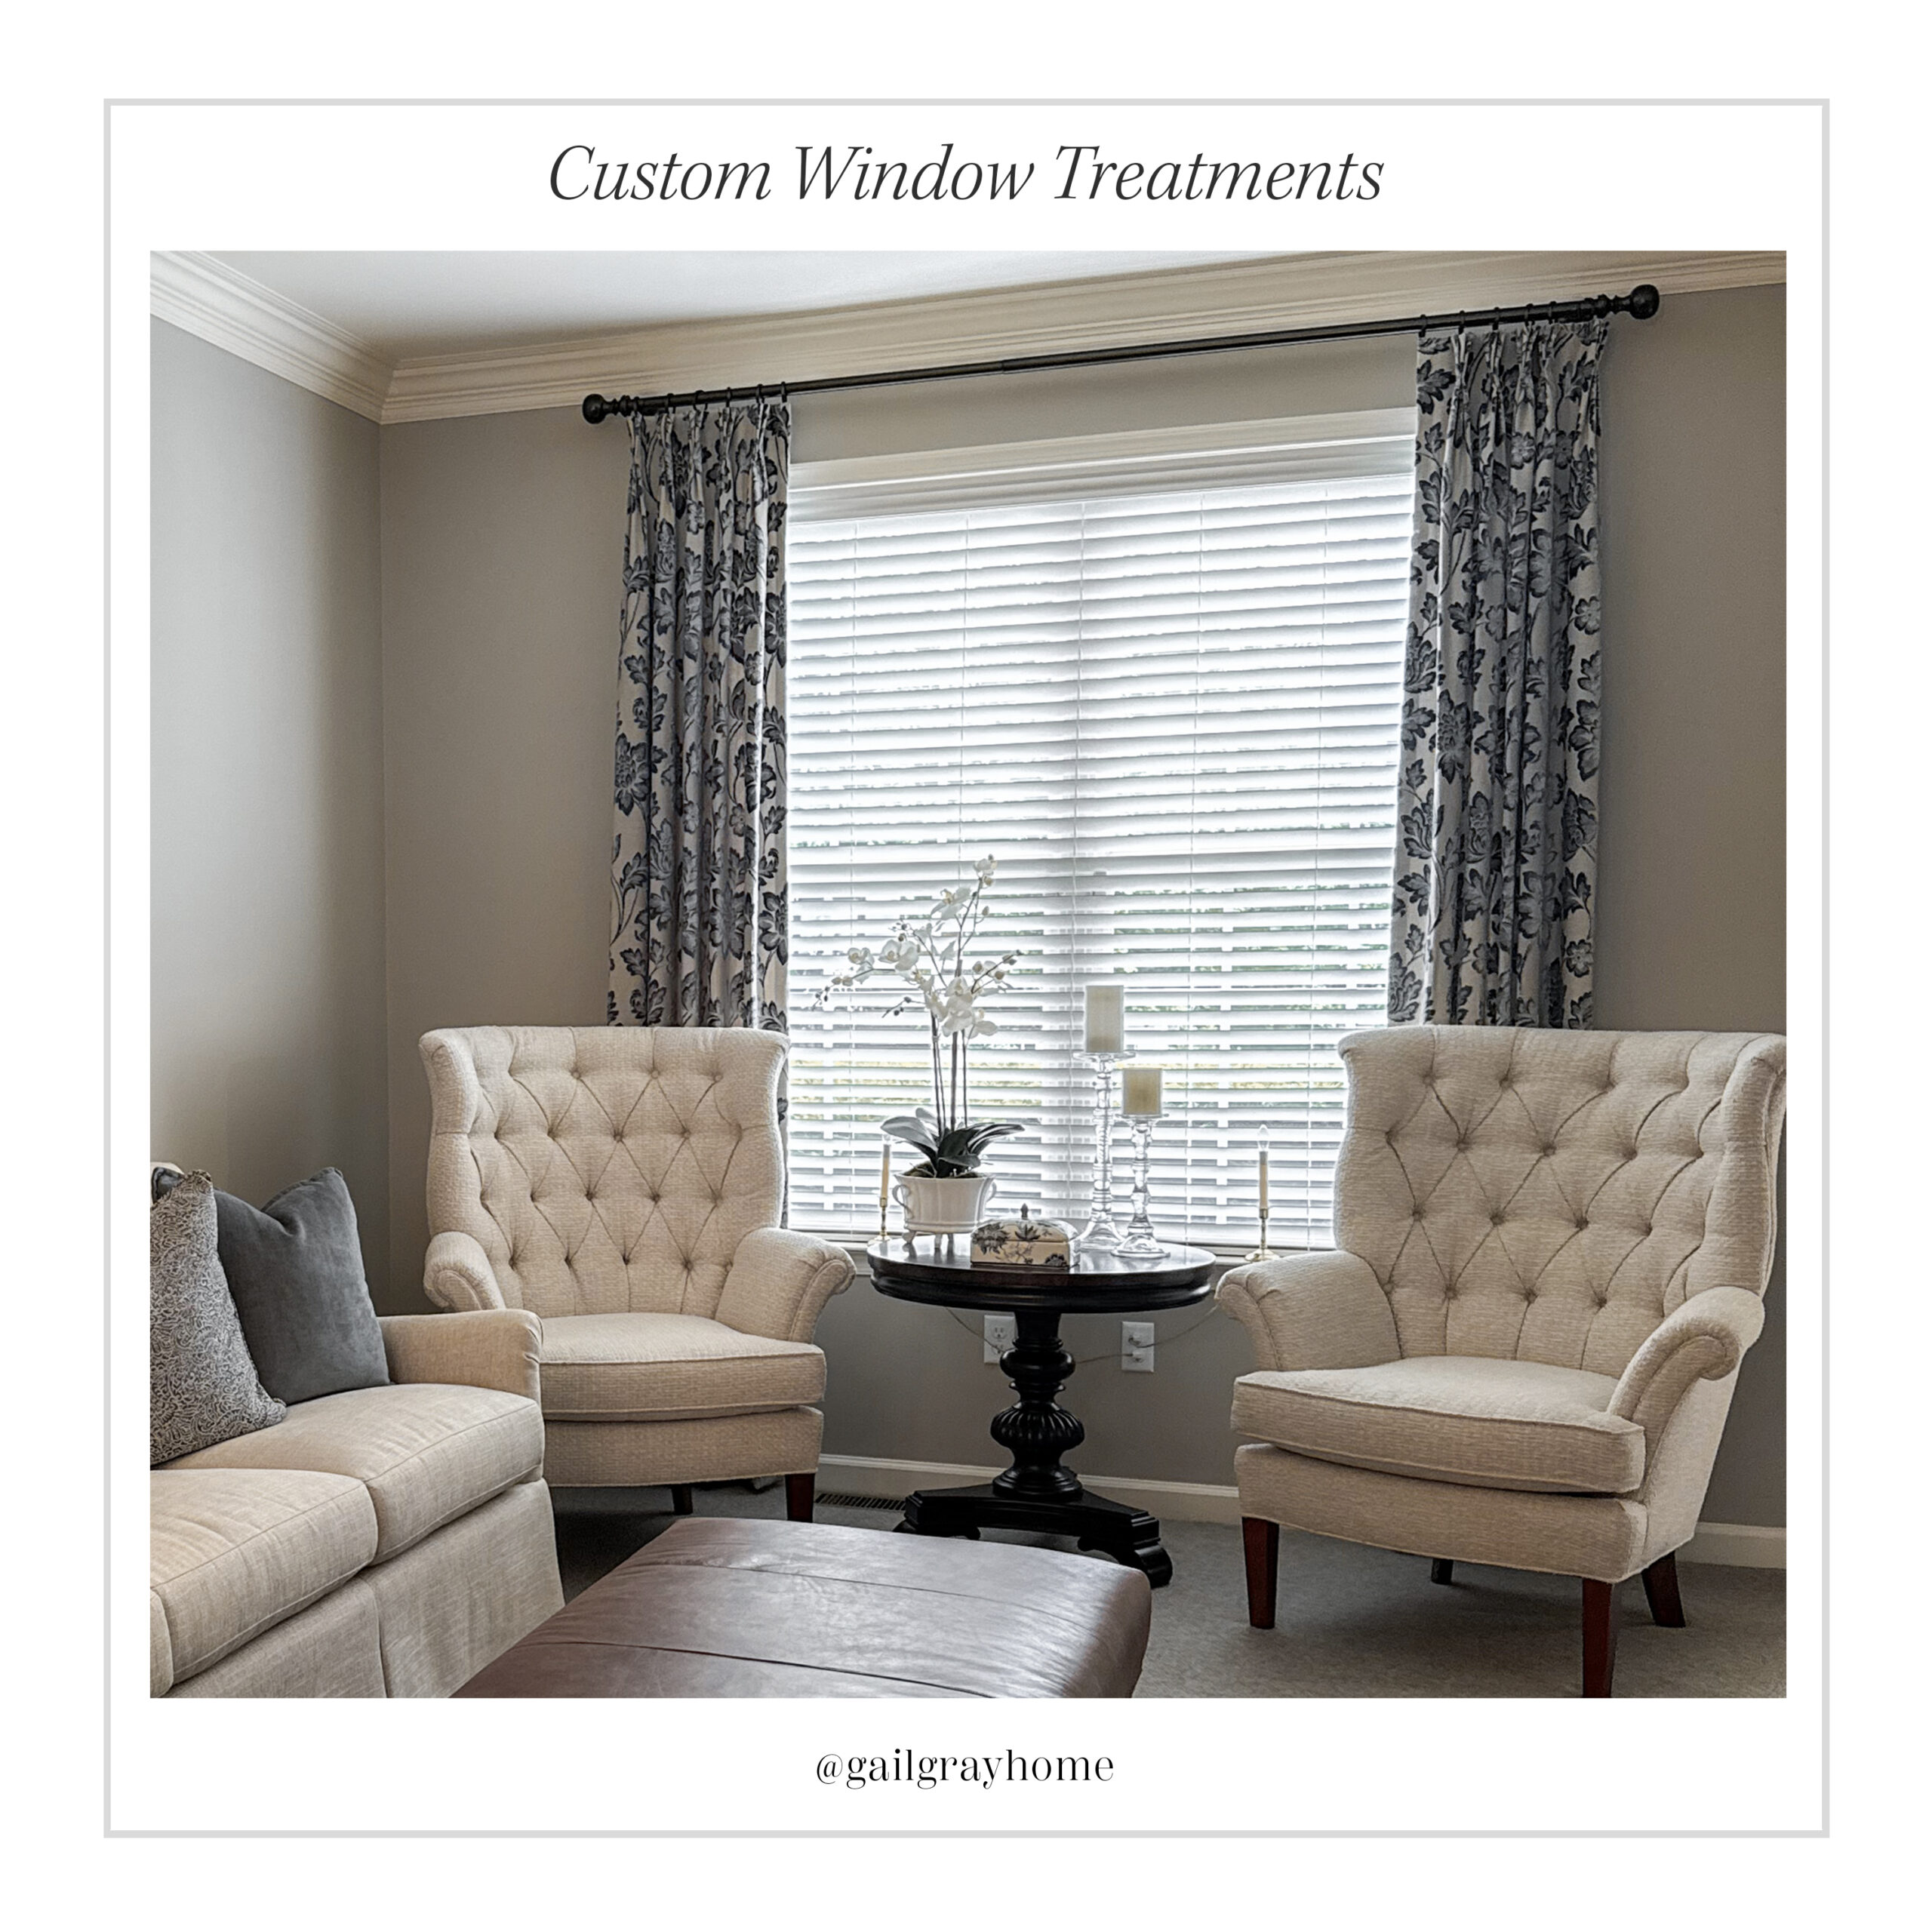 Custom Window Treatments Design Services at GailGray Home